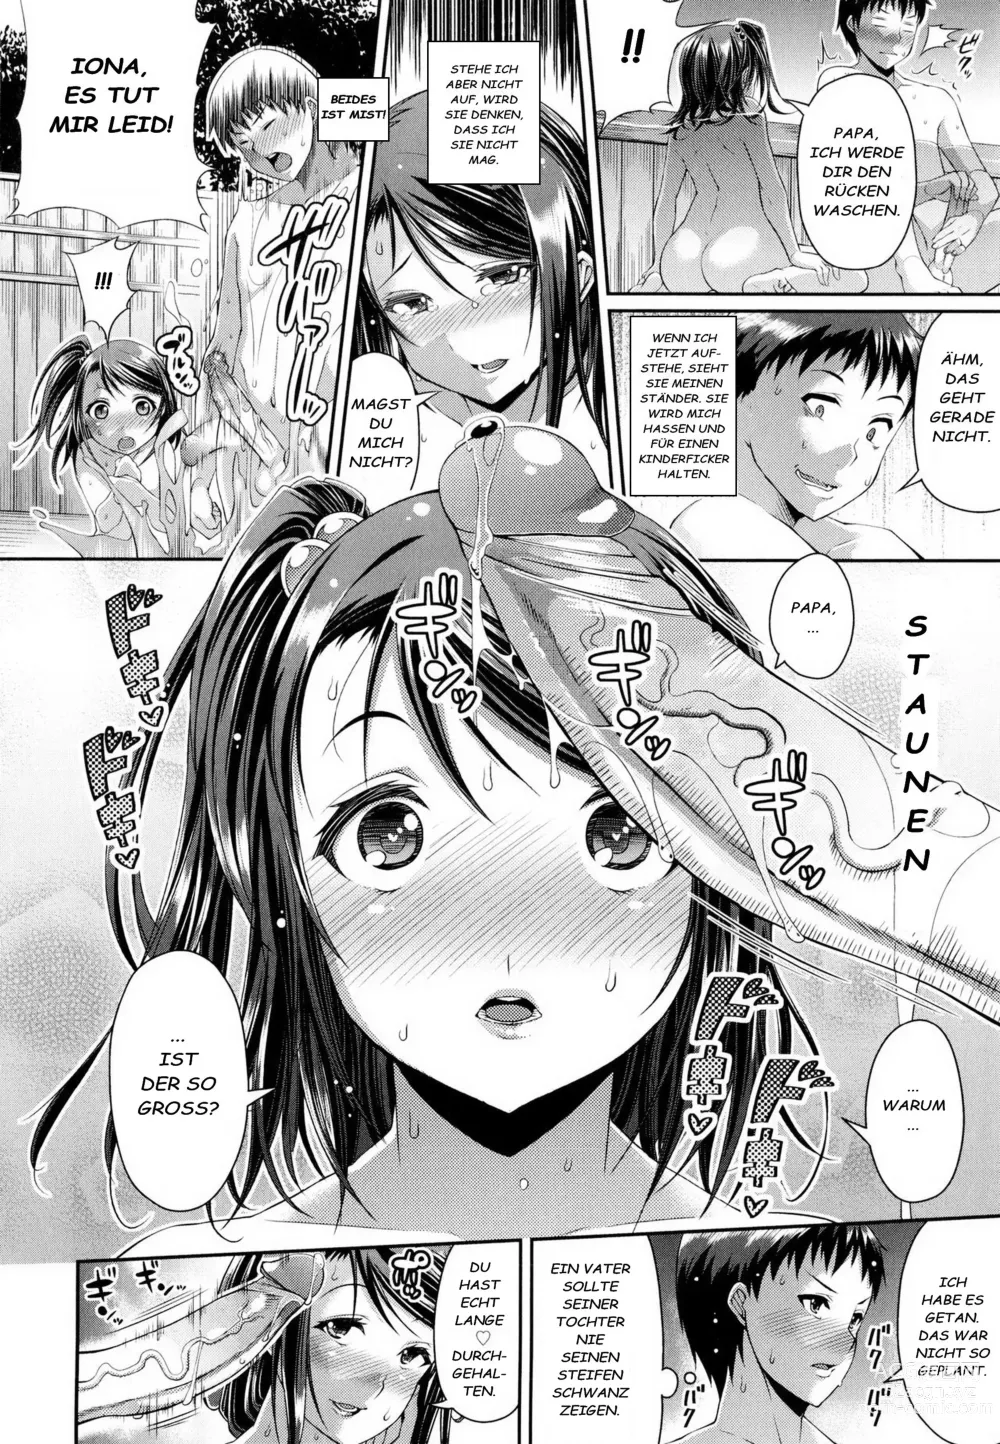 Page 10 of manga Step Child Swapping (decensored)